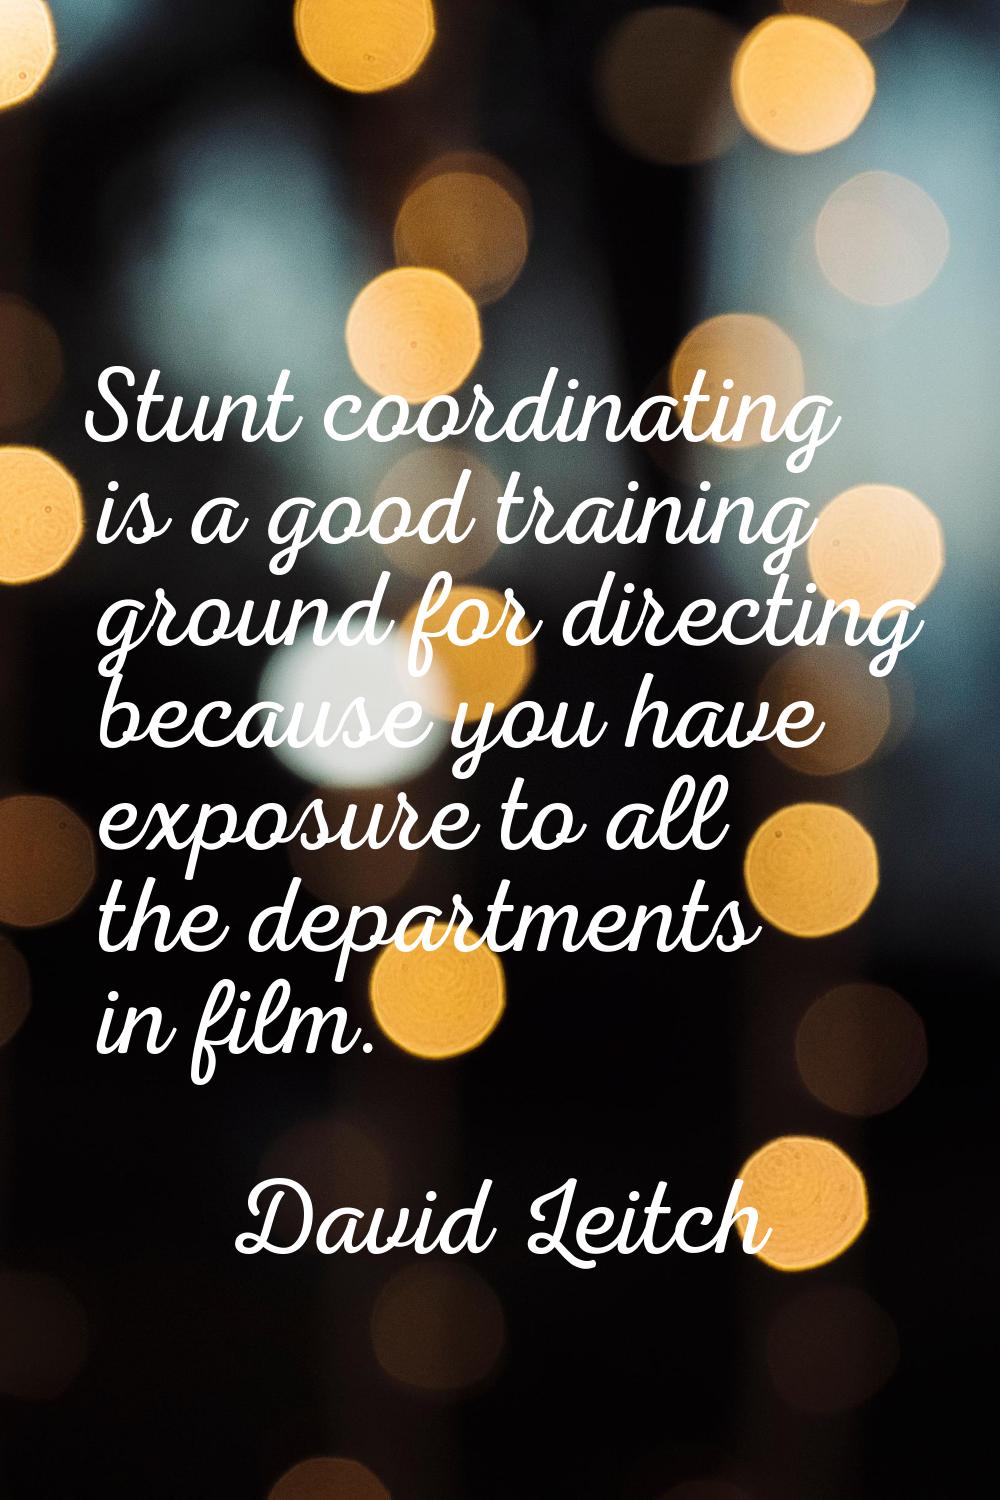 Stunt coordinating is a good training ground for directing because you have exposure to all the dep